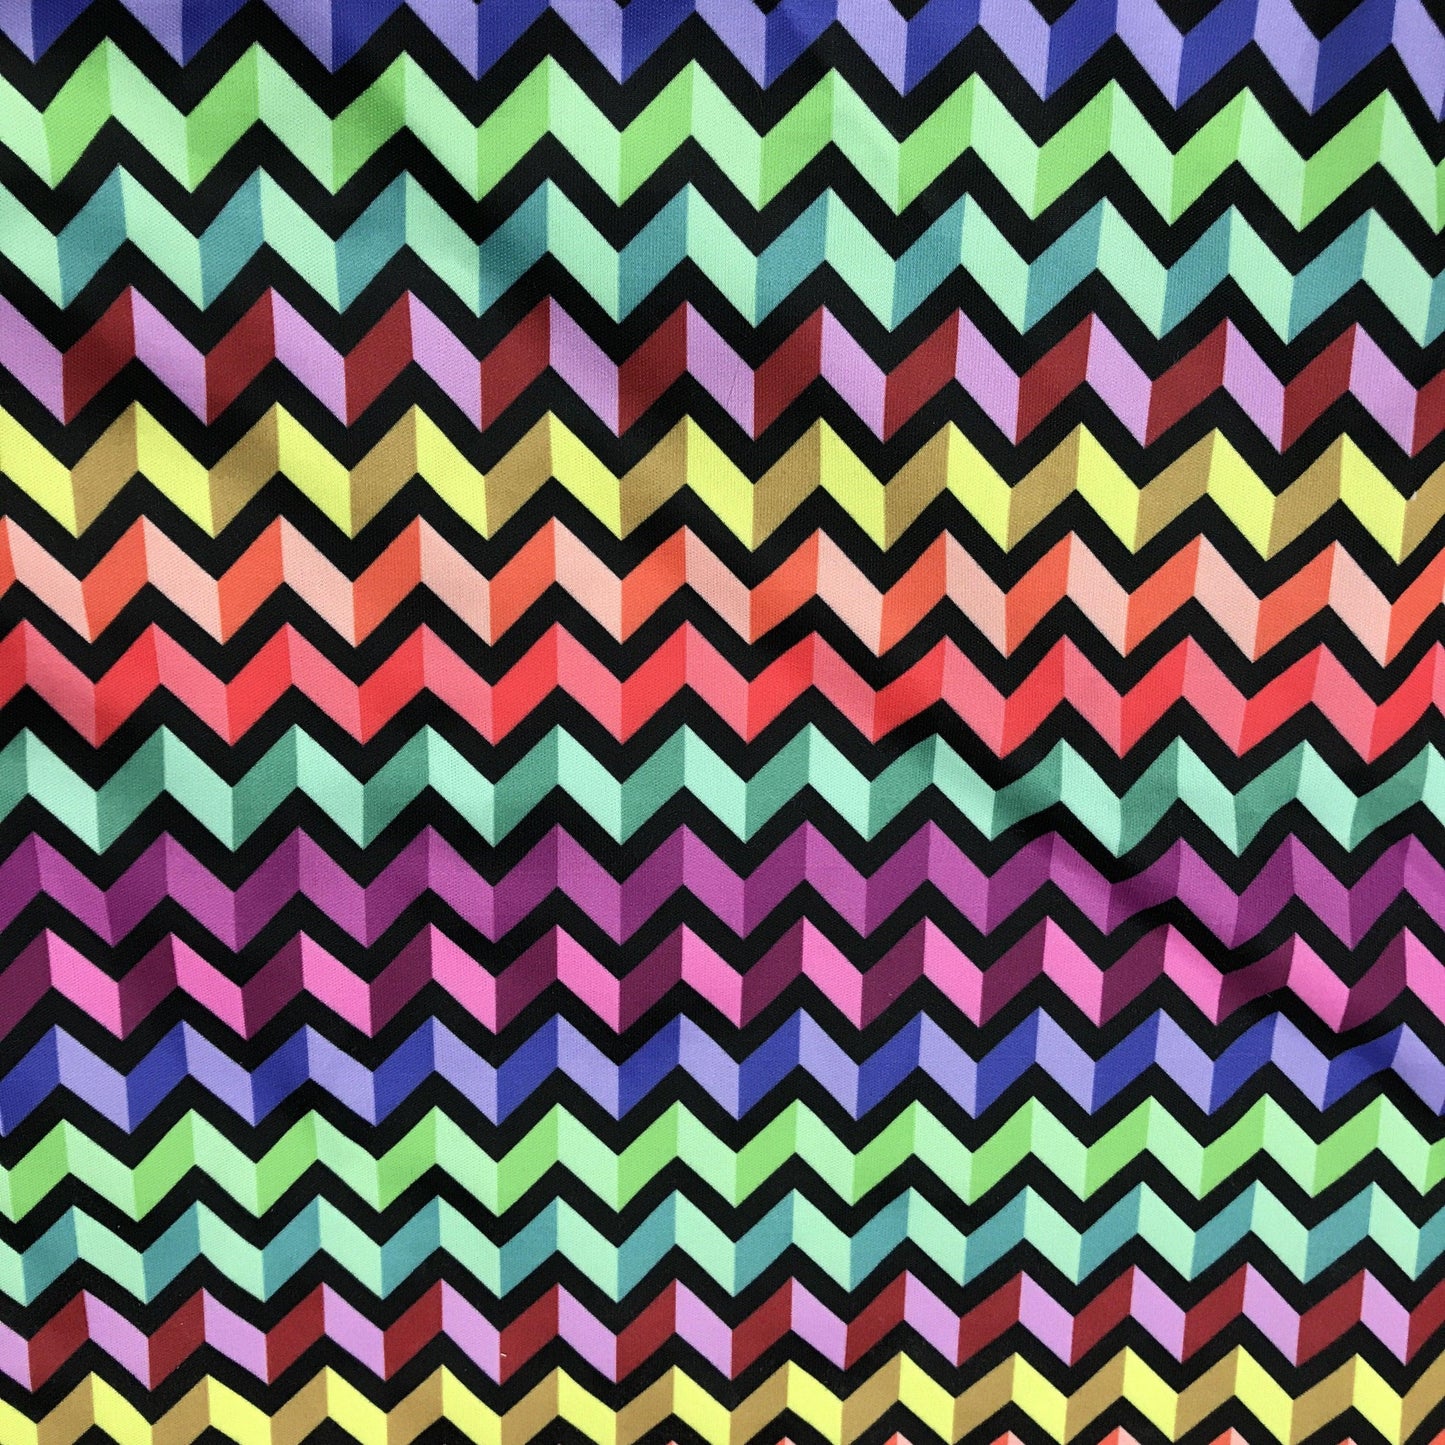 3D Chevron 1 mil PUL Fabric - Made in the USA - Nature's Fabrics